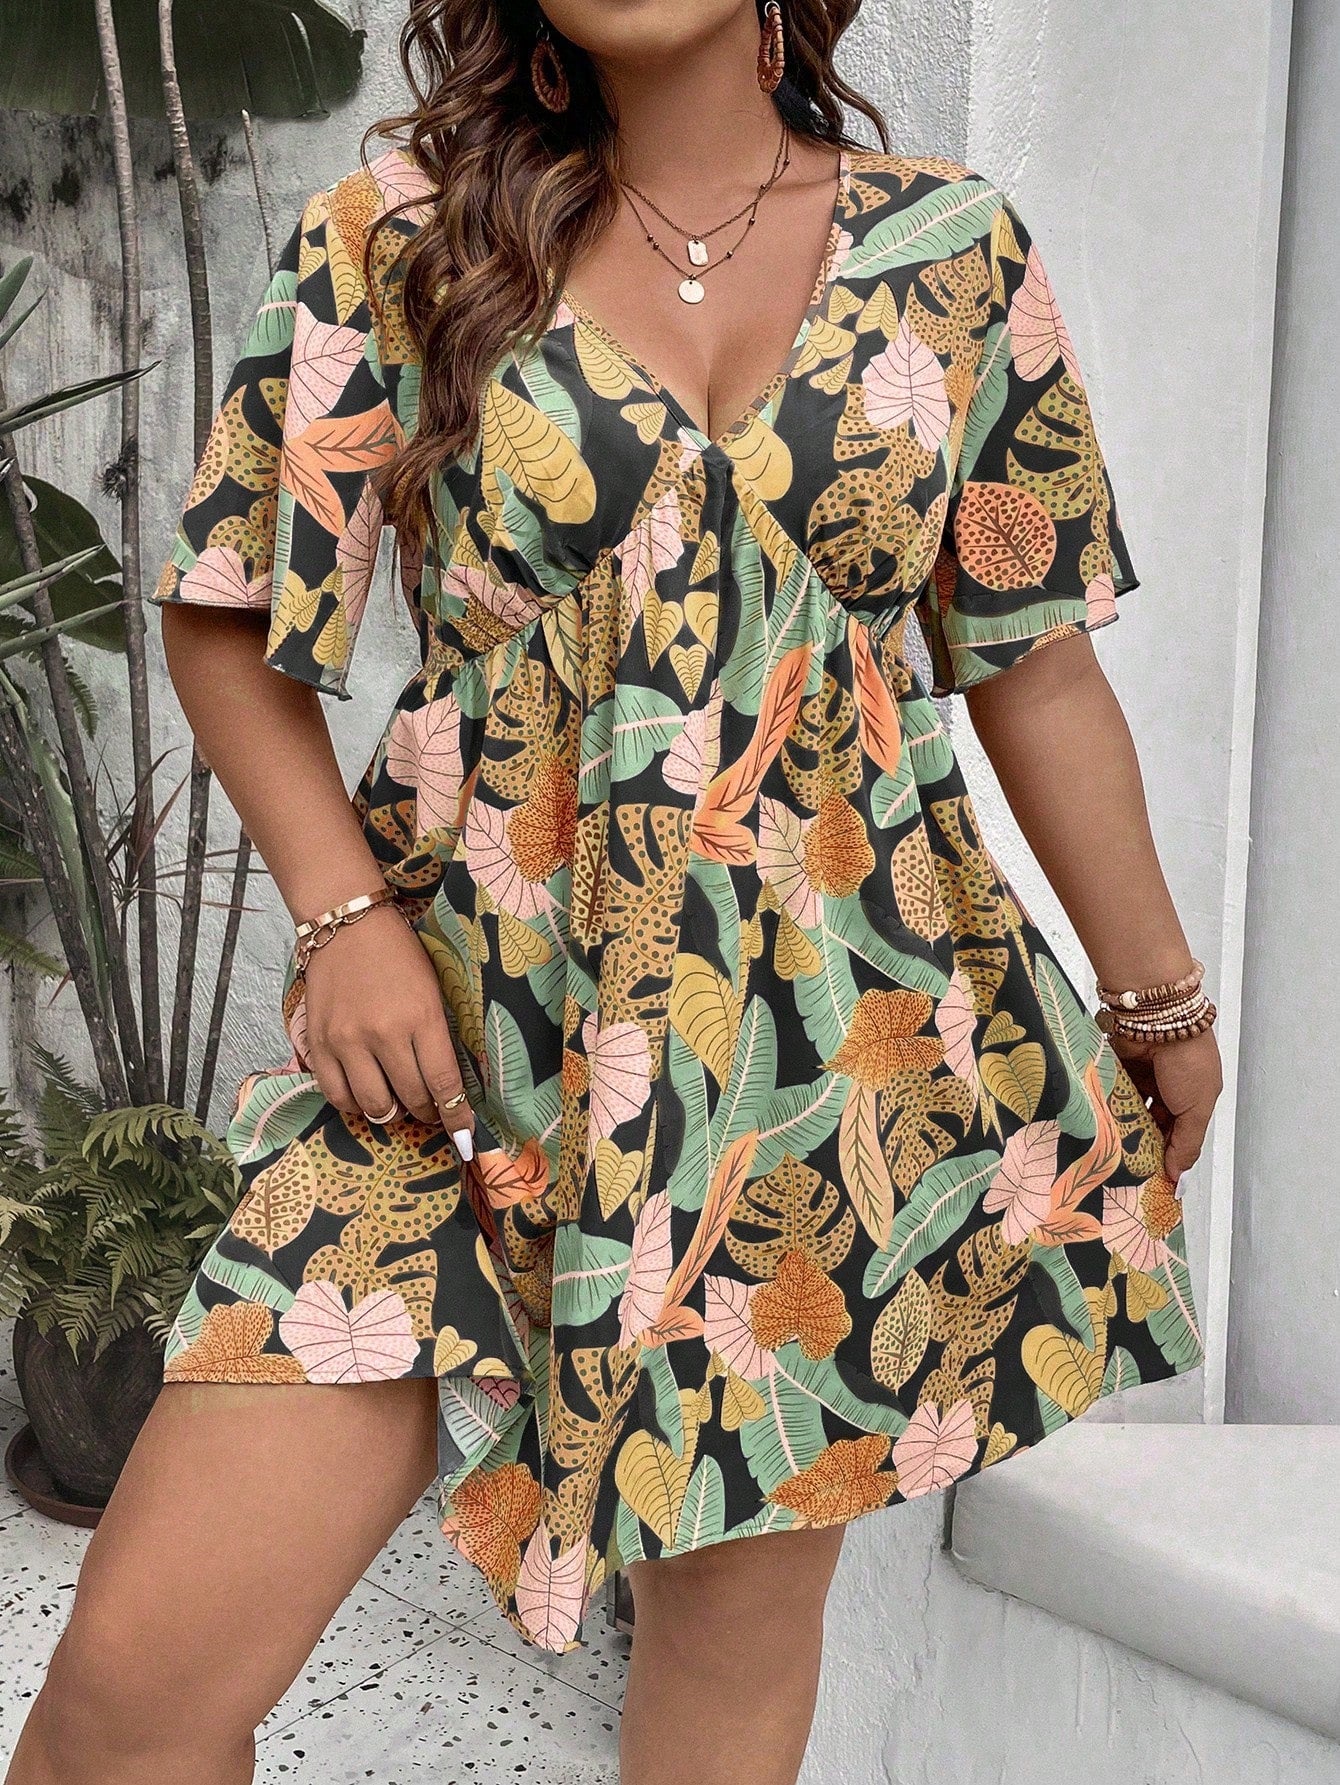 Plus Tropical Print Butterfly Sleeve Dress